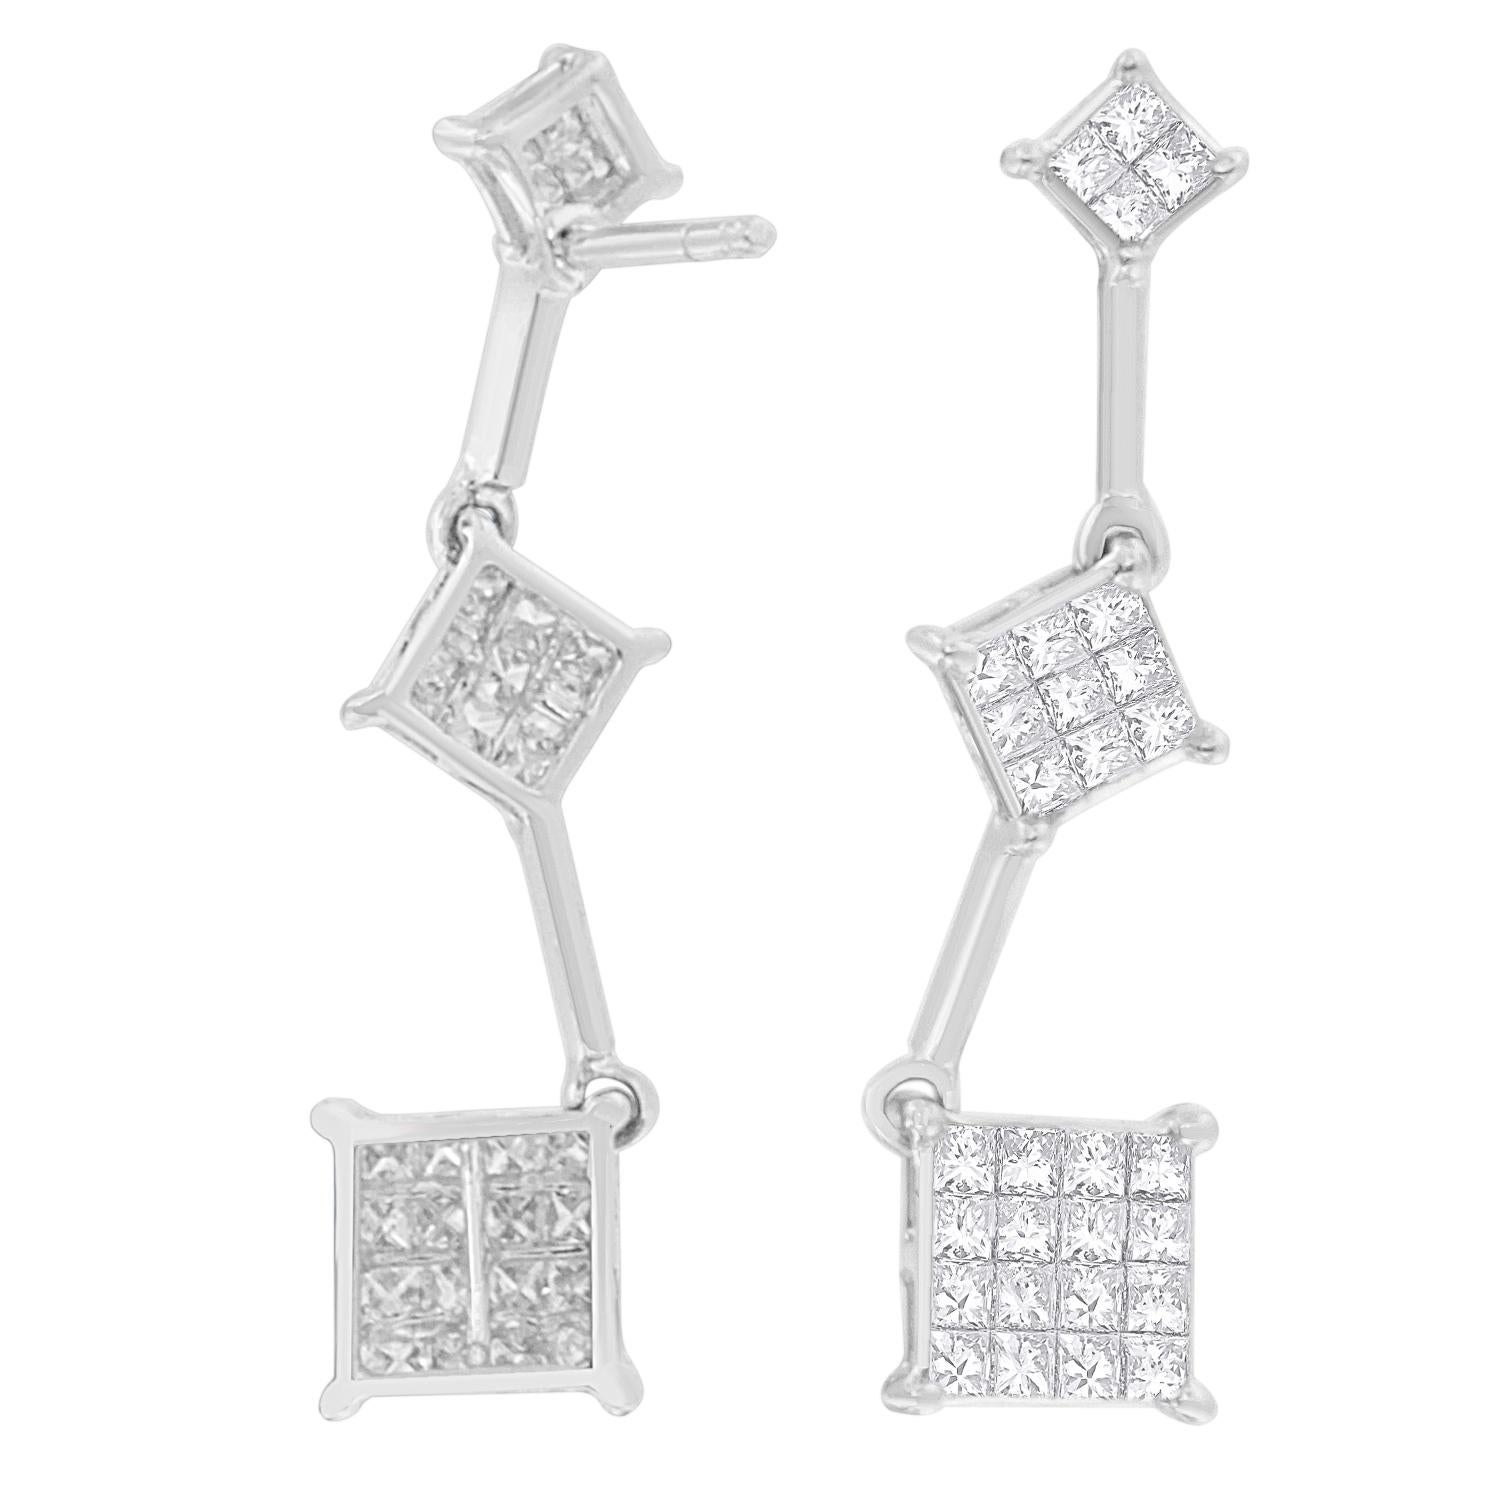 Complete her charming look with these adorable yet sophisticated diamond earrings. Designed in a modern style, the beautiful earrings features a trio of three square-shaped accents and composed of rich 14 karats white gold. Each of the earrings